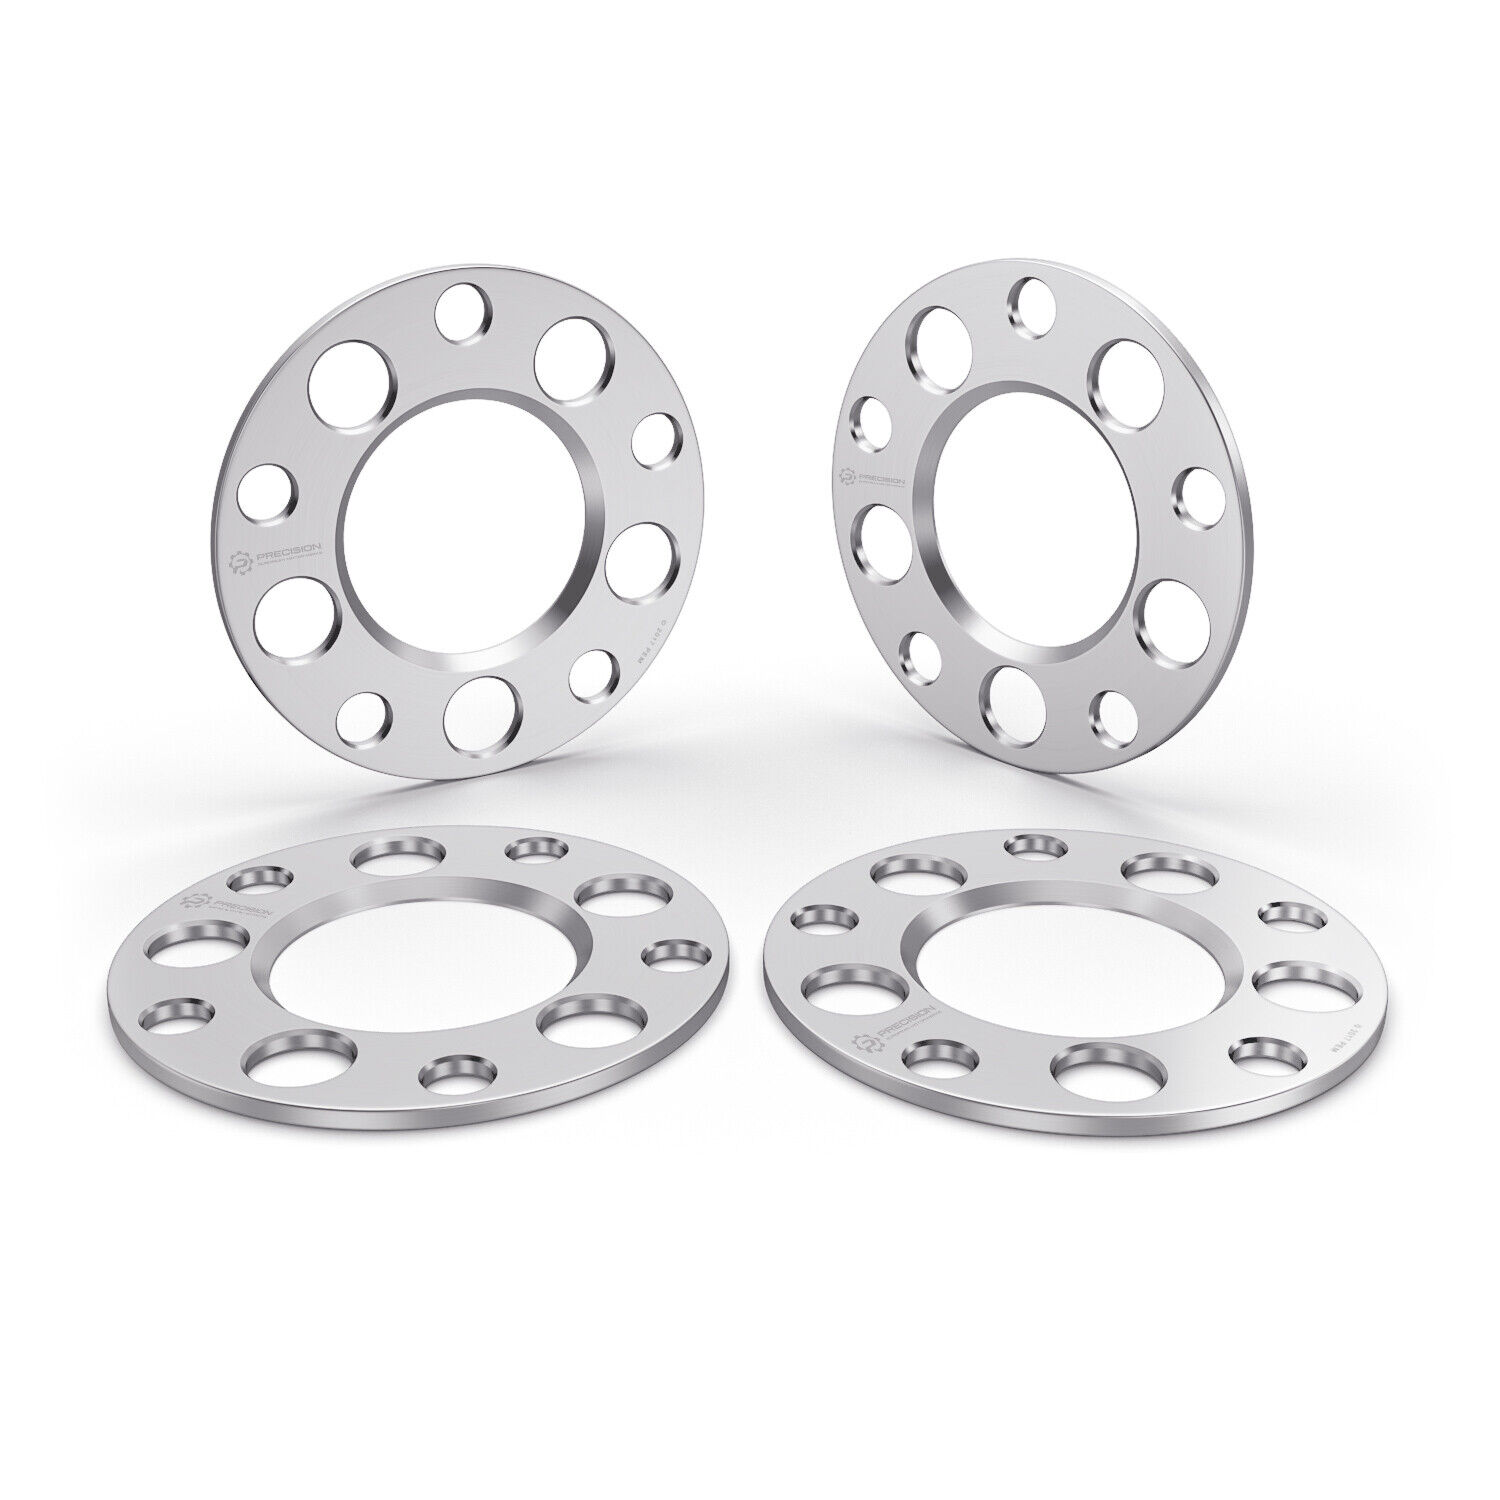 4pc | 5mm | Billet Hubcentric Wheel Spacers for Mercedes Benz | 5x112 | CB 66.56